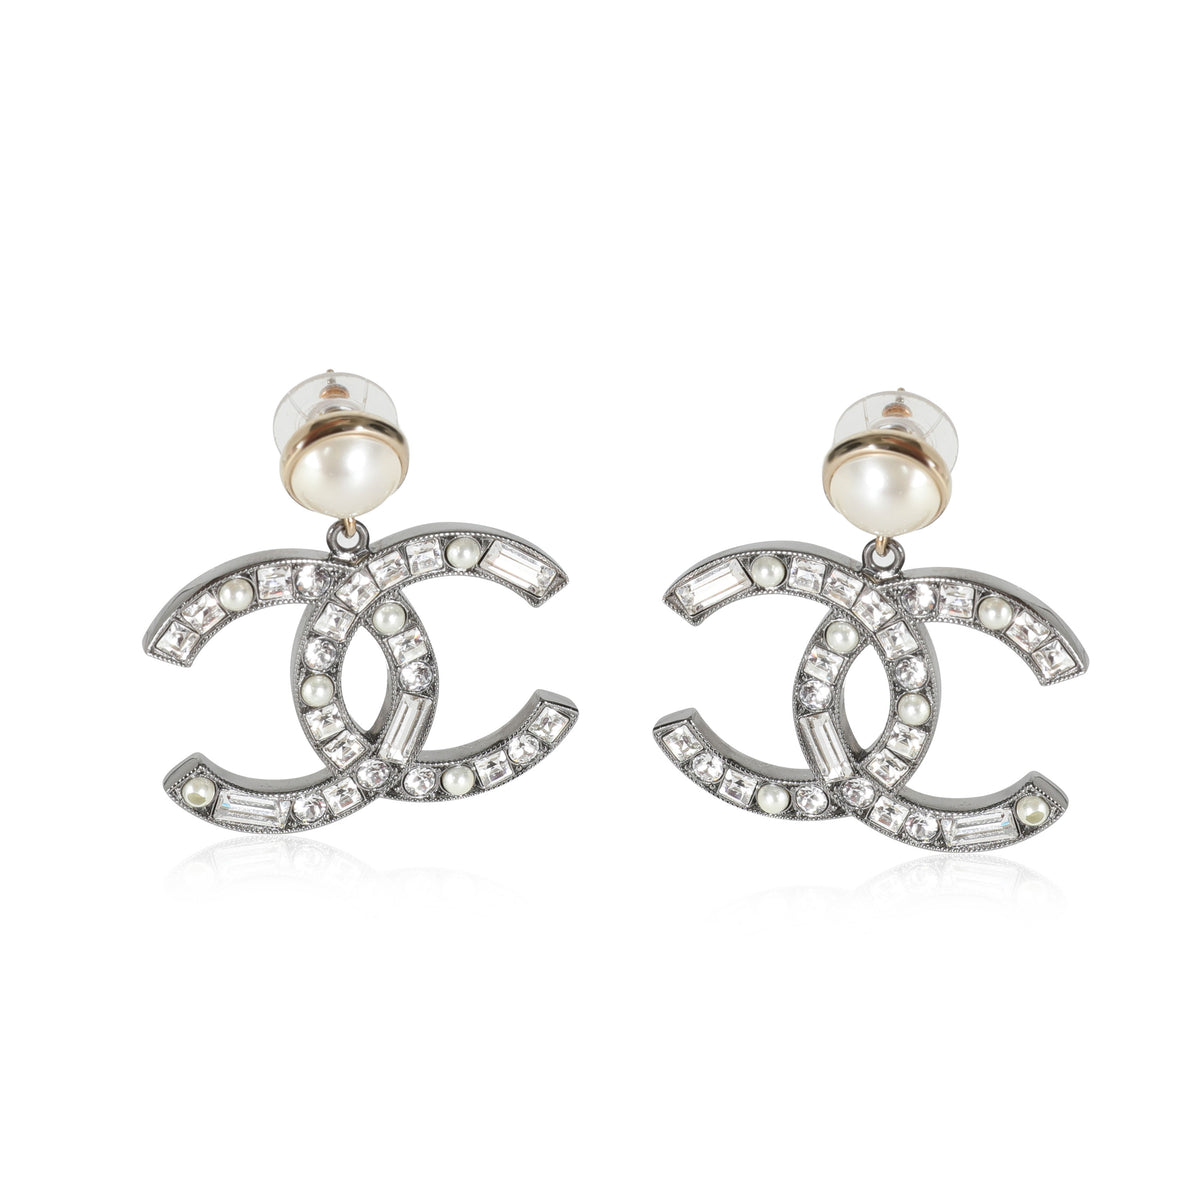 Chanel CC Two-Tone Faux Pearl & Strass Earrings From The 2020 Collection, myGemma, QA